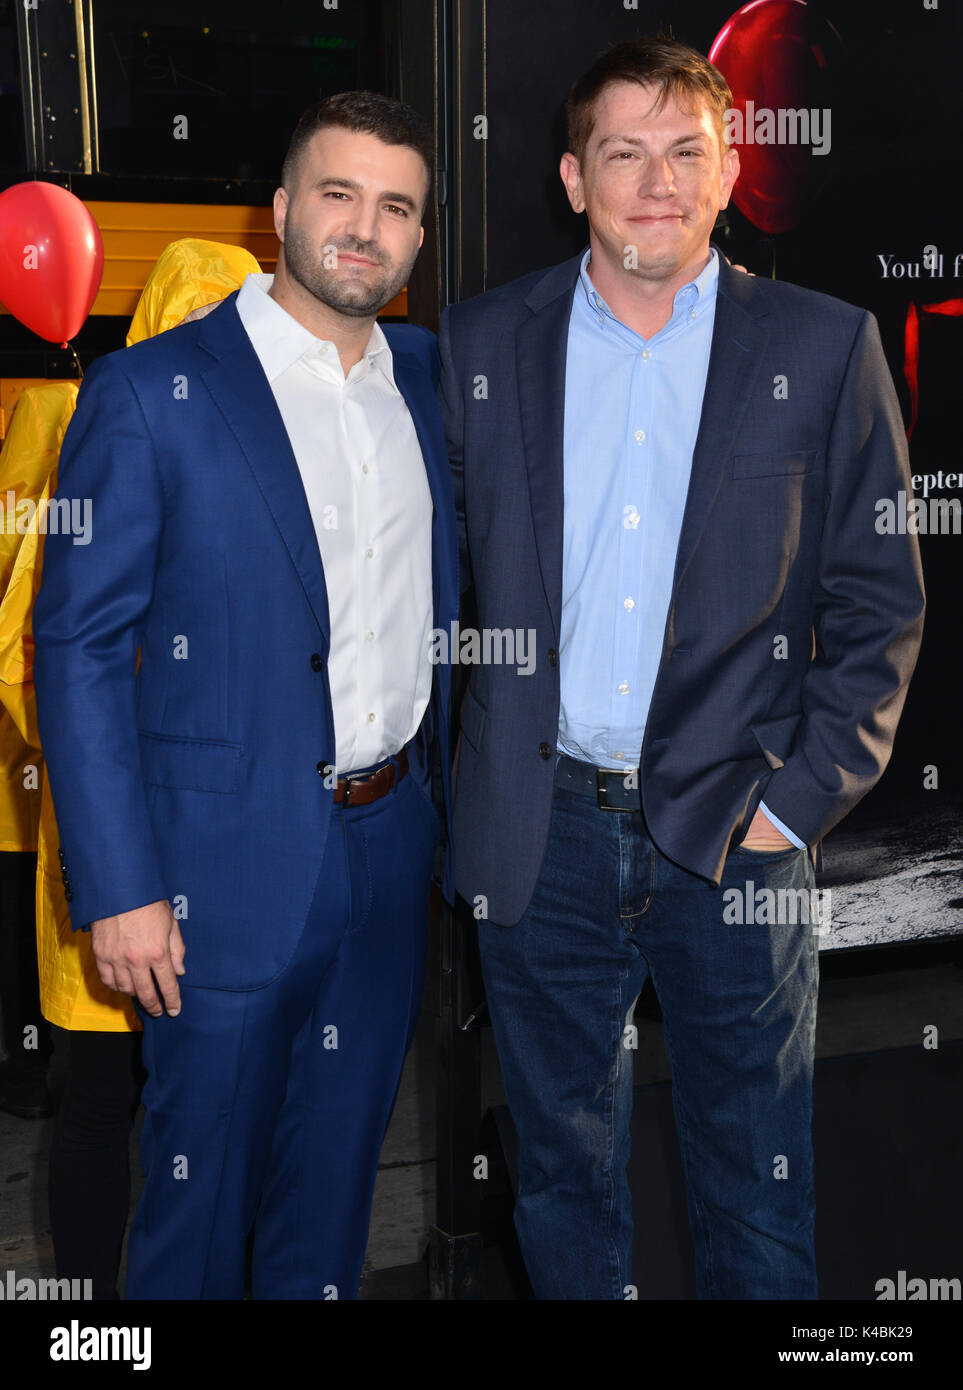 Los Angeles, USA. 05th Sep, 2017. Seth Grahame-Smith, David Katzenberg - Producer arriving at the IT You'll Float Too Premiere at the TCL Chinese Theatre in Los Angeles. September 5, 2017. Credit: Tsuni/USA/Alamy Live News Stock Photo